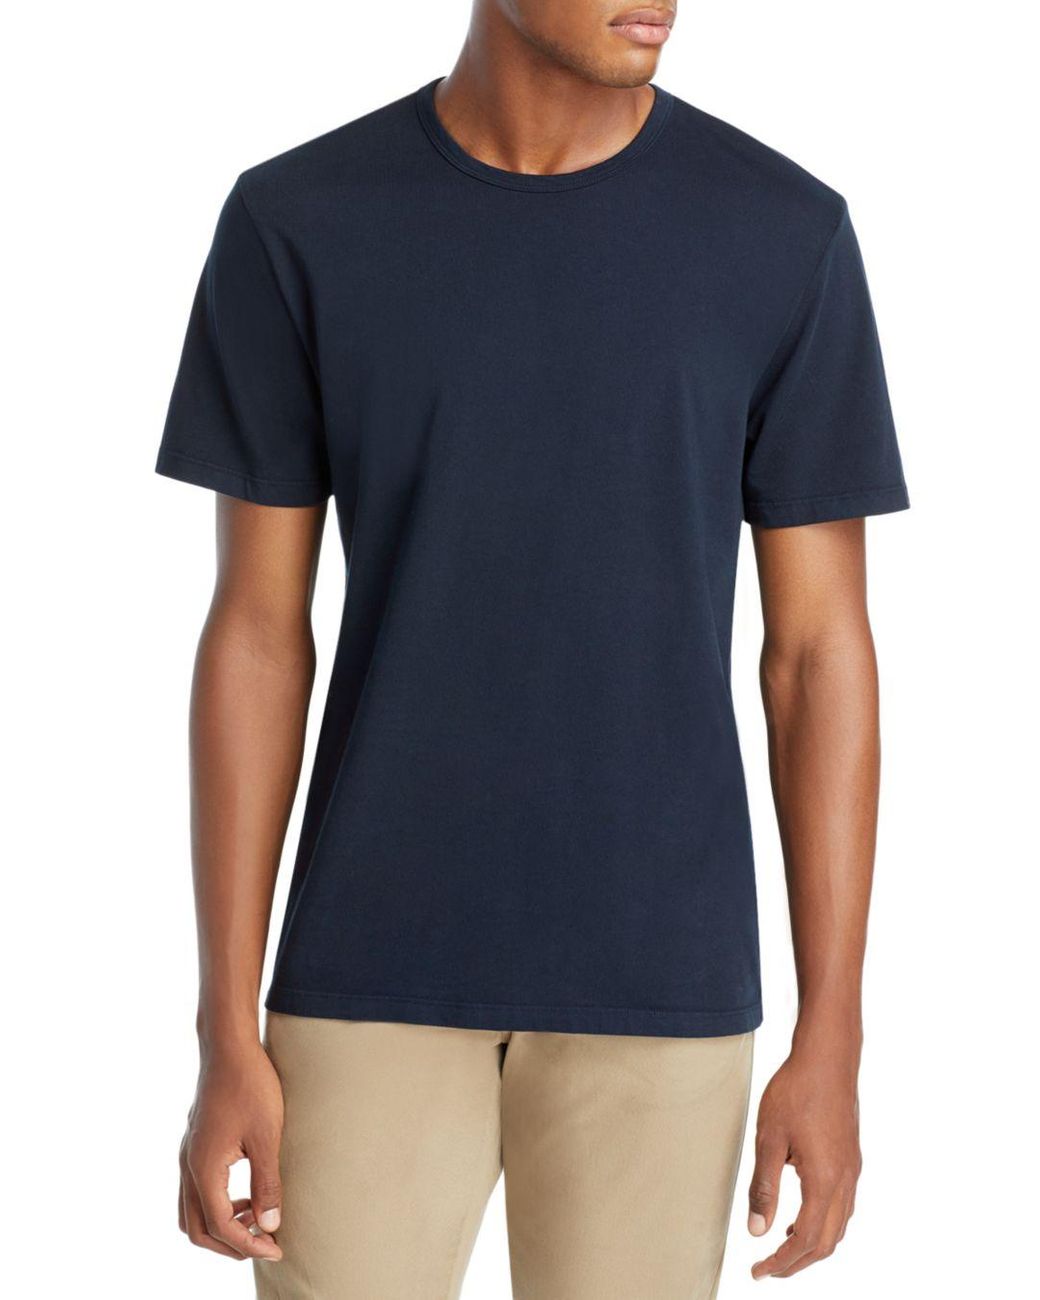 Vince Cotton Garment Dyed Crewneck Tee in Blue for Men - Lyst